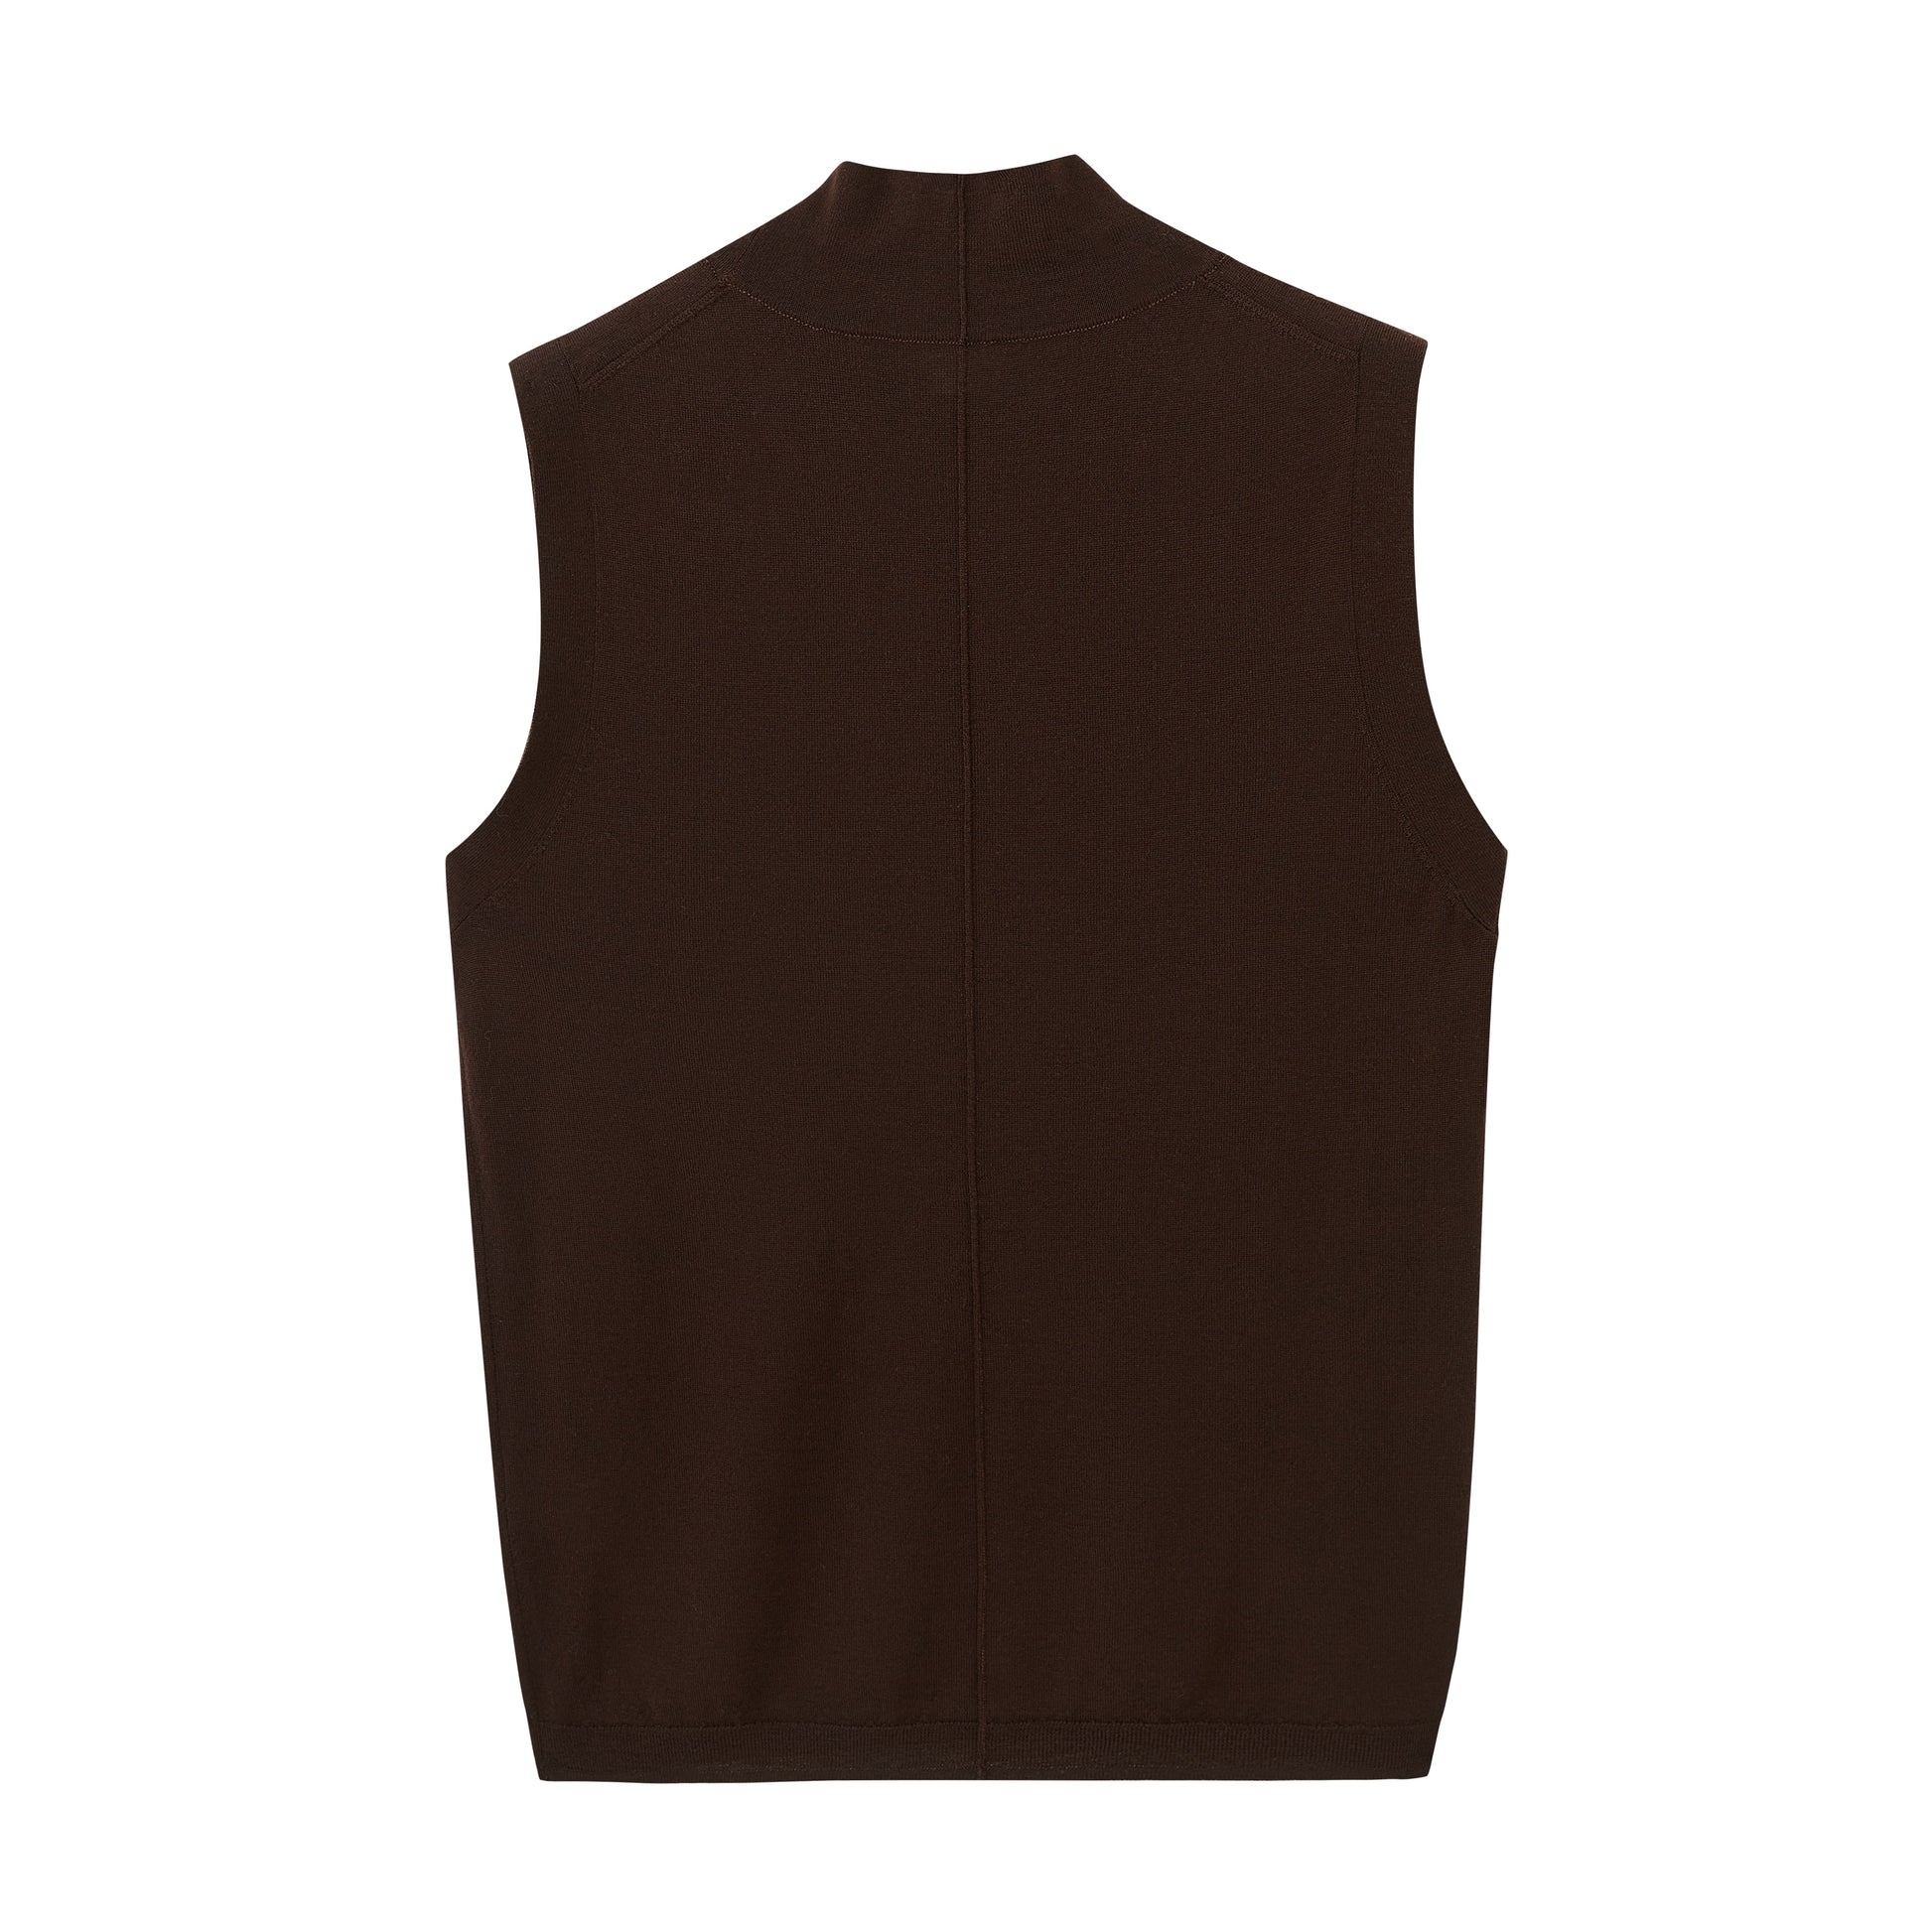 a brown silky wool mock neck sleeveless sweater from back